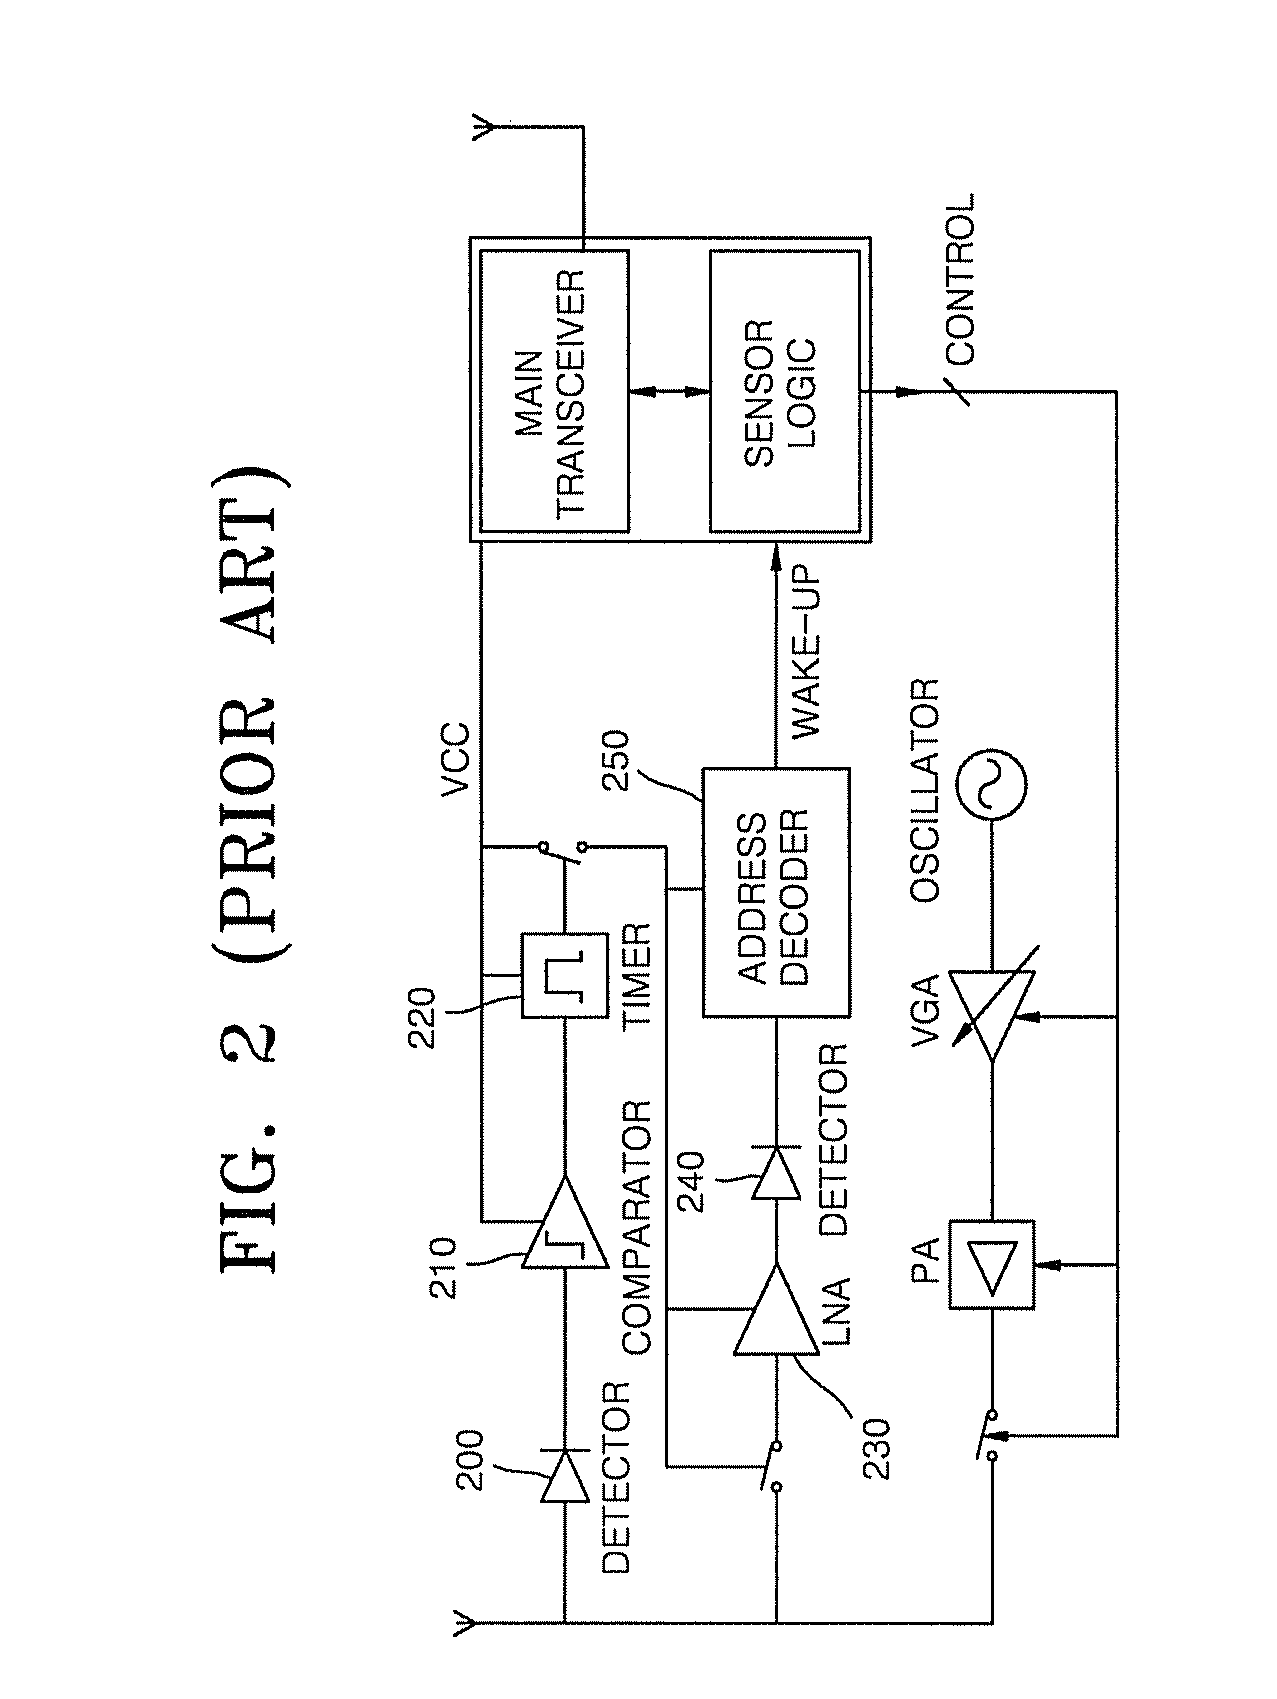 Wake-up receiver and wake-up method using duty cycling and power off technique